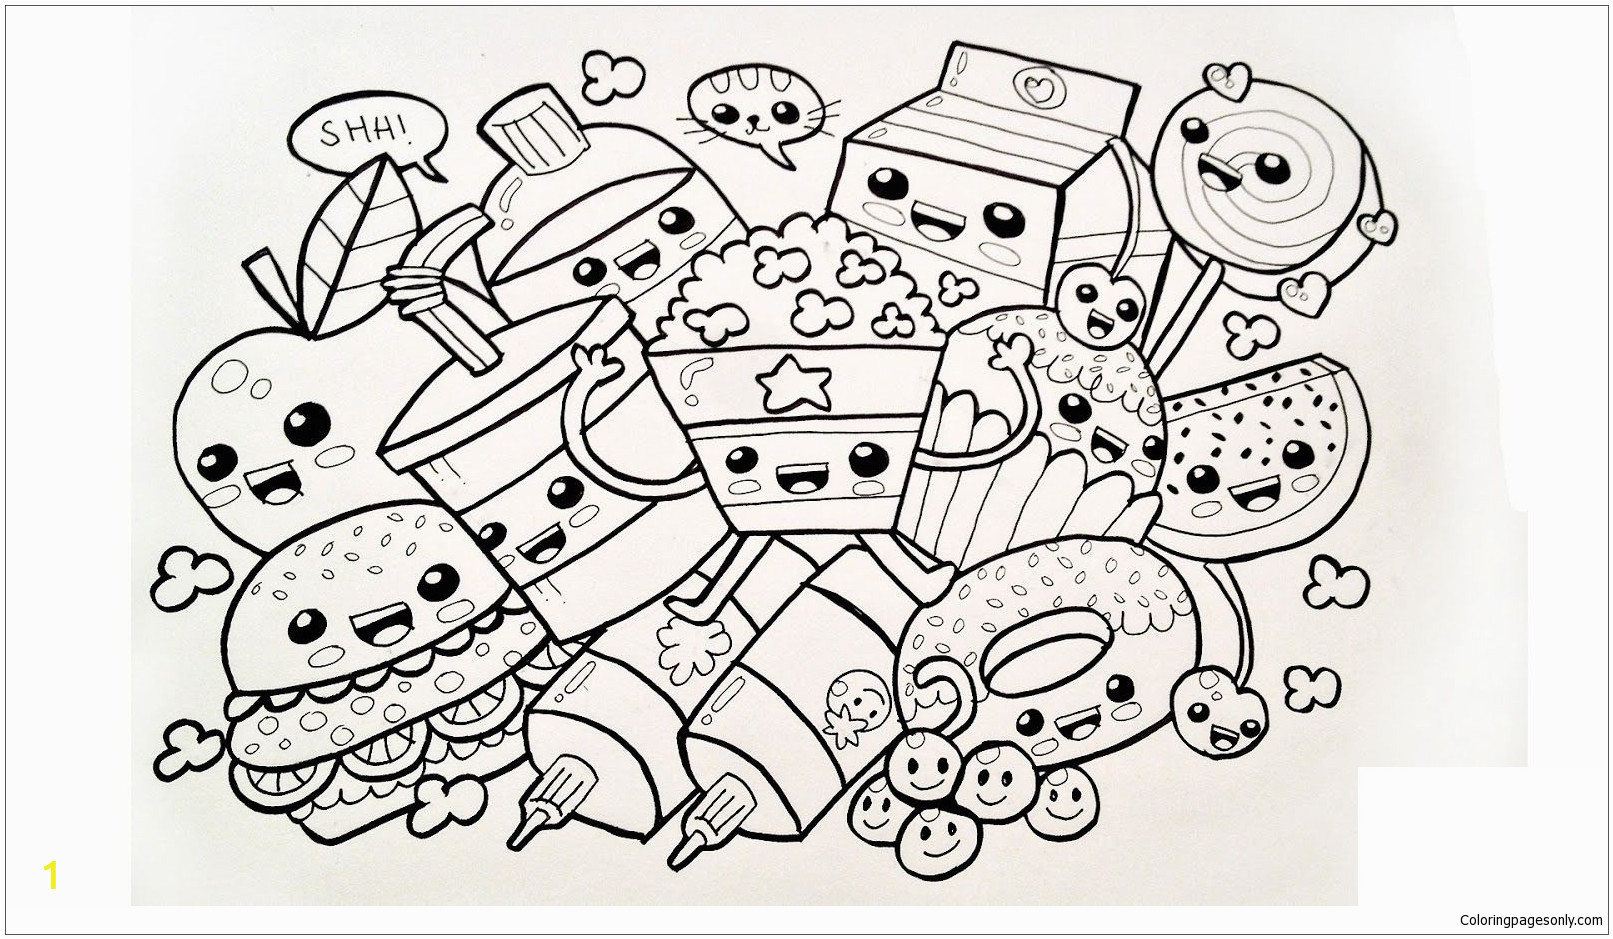 Cute Food Coloring Pages to Print Cute Food Coloring Page Free Coloring Pages Line